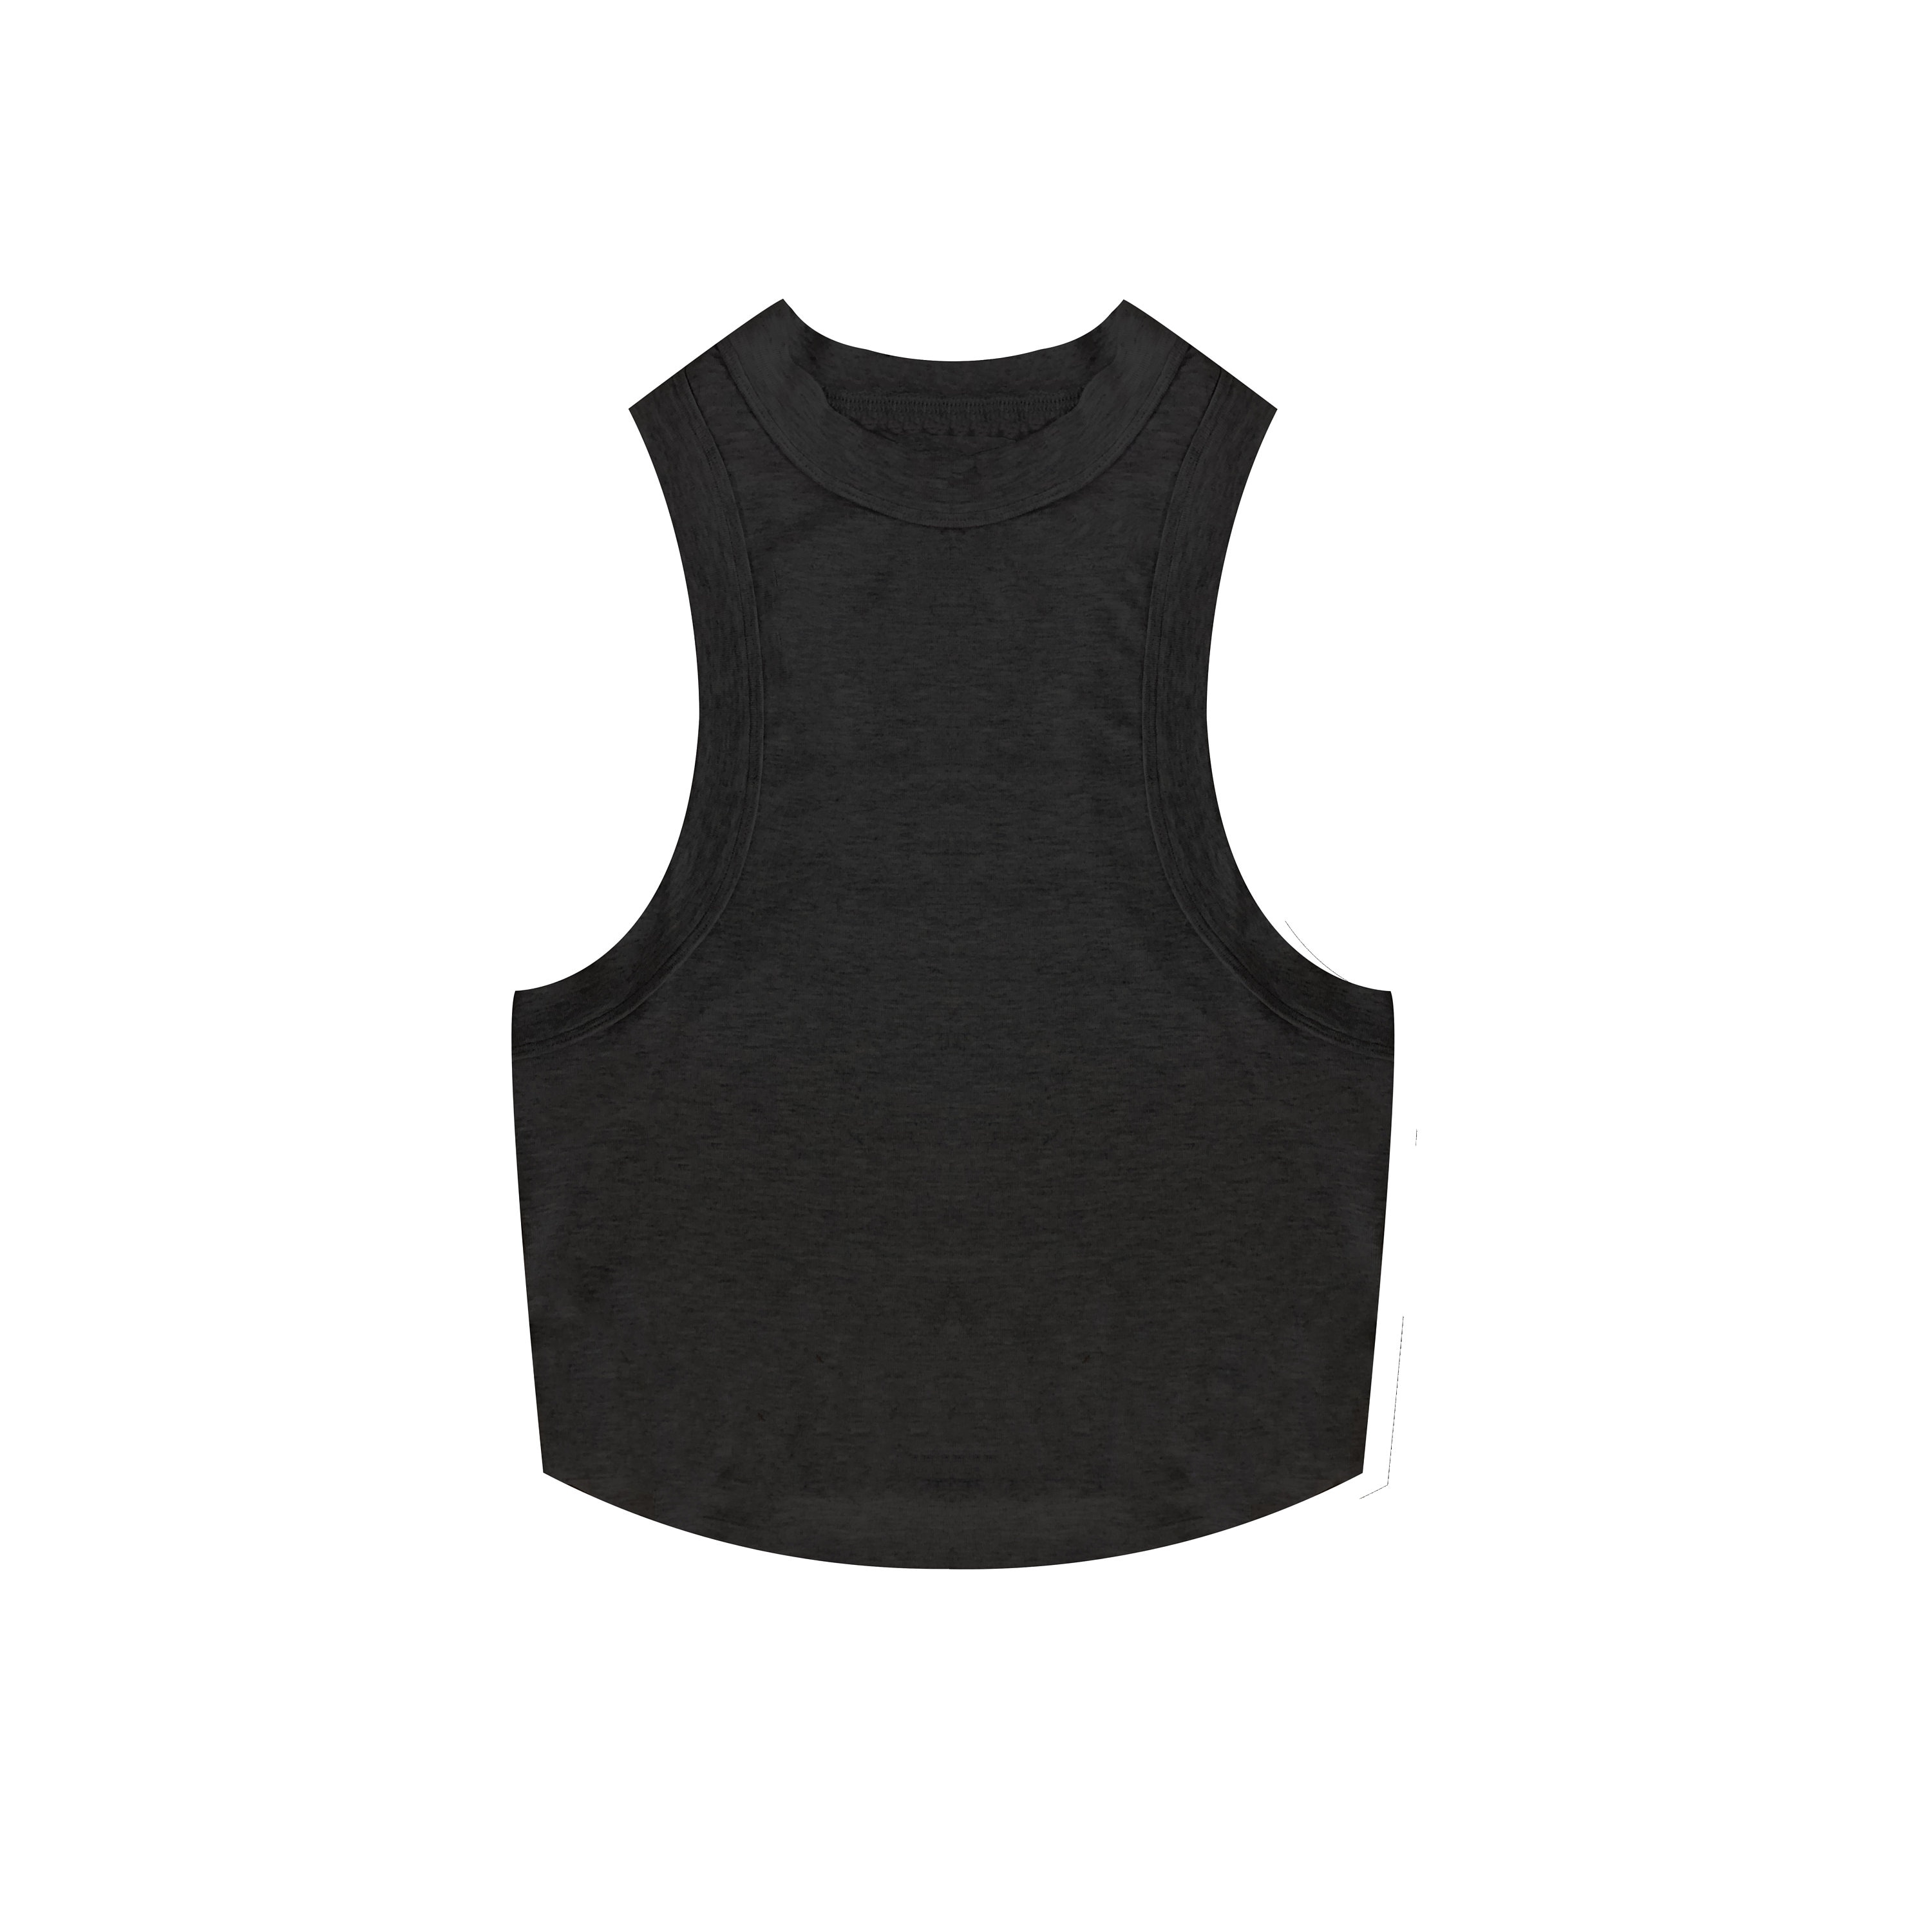 Super Sexy Side Boob Tight Tank Crop Top for Raves, Festival